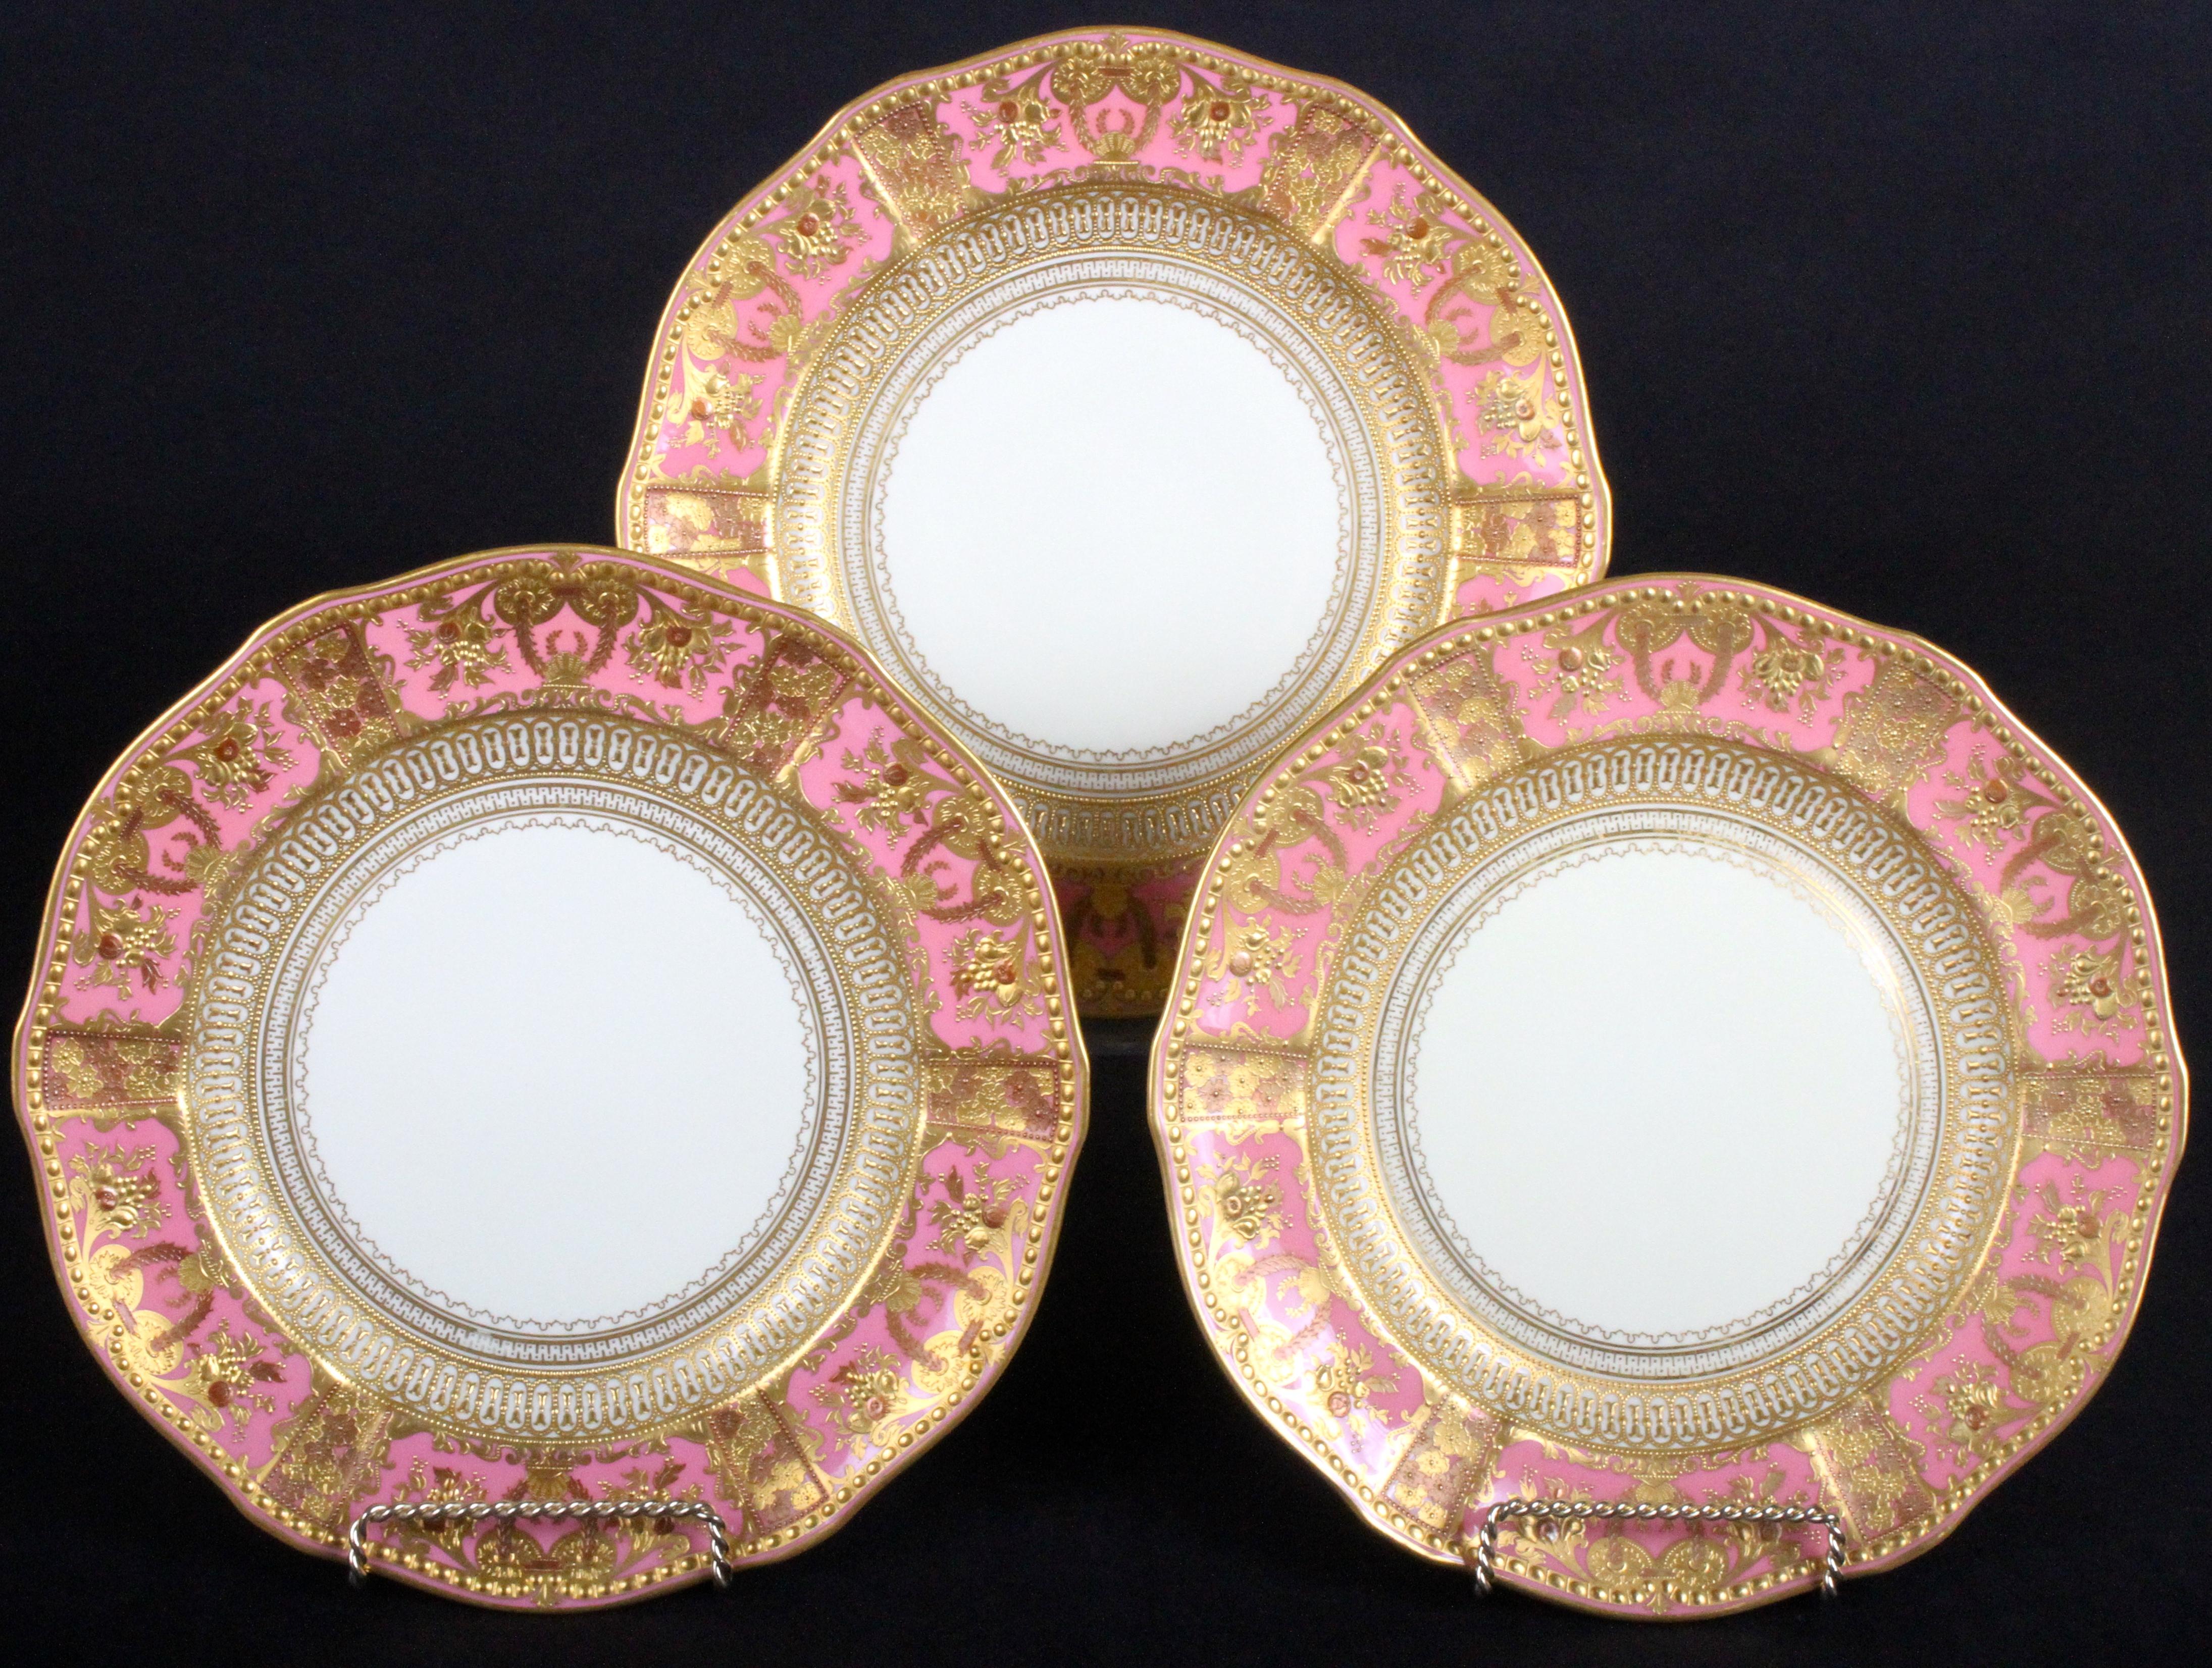 These 12 ornate service or dinner plates are from the esteemed Royal Crown Derby firm of Derby, England. The plate rim is divided into 6 panels that feature neoclassical motifs of cornucopia, flowers and laurel garland, the panels are separated by 6